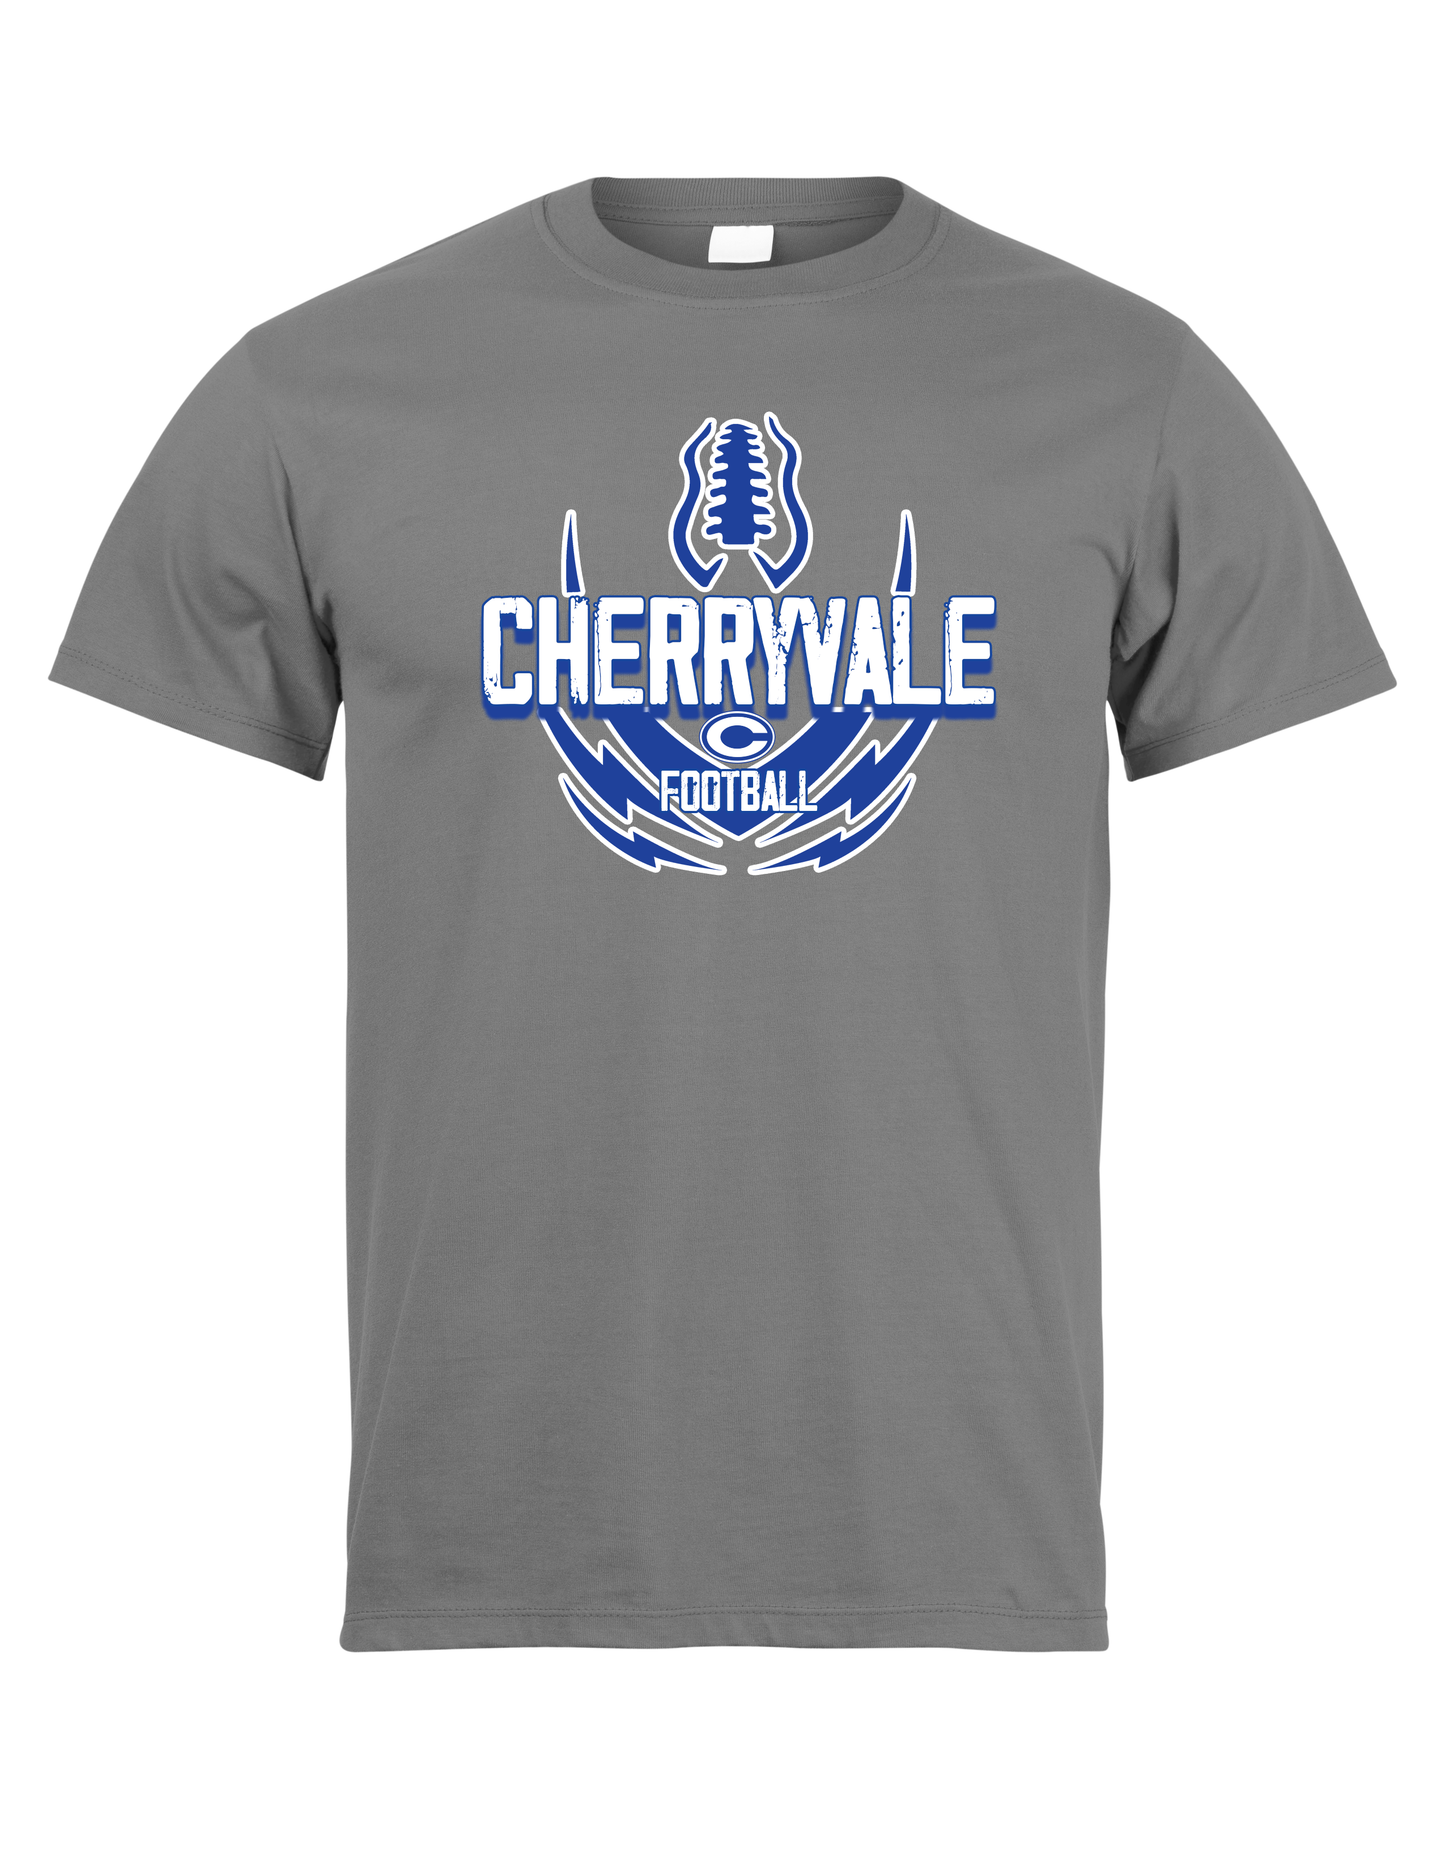 CHERRYVALE - Football Adult & Youth Sizes